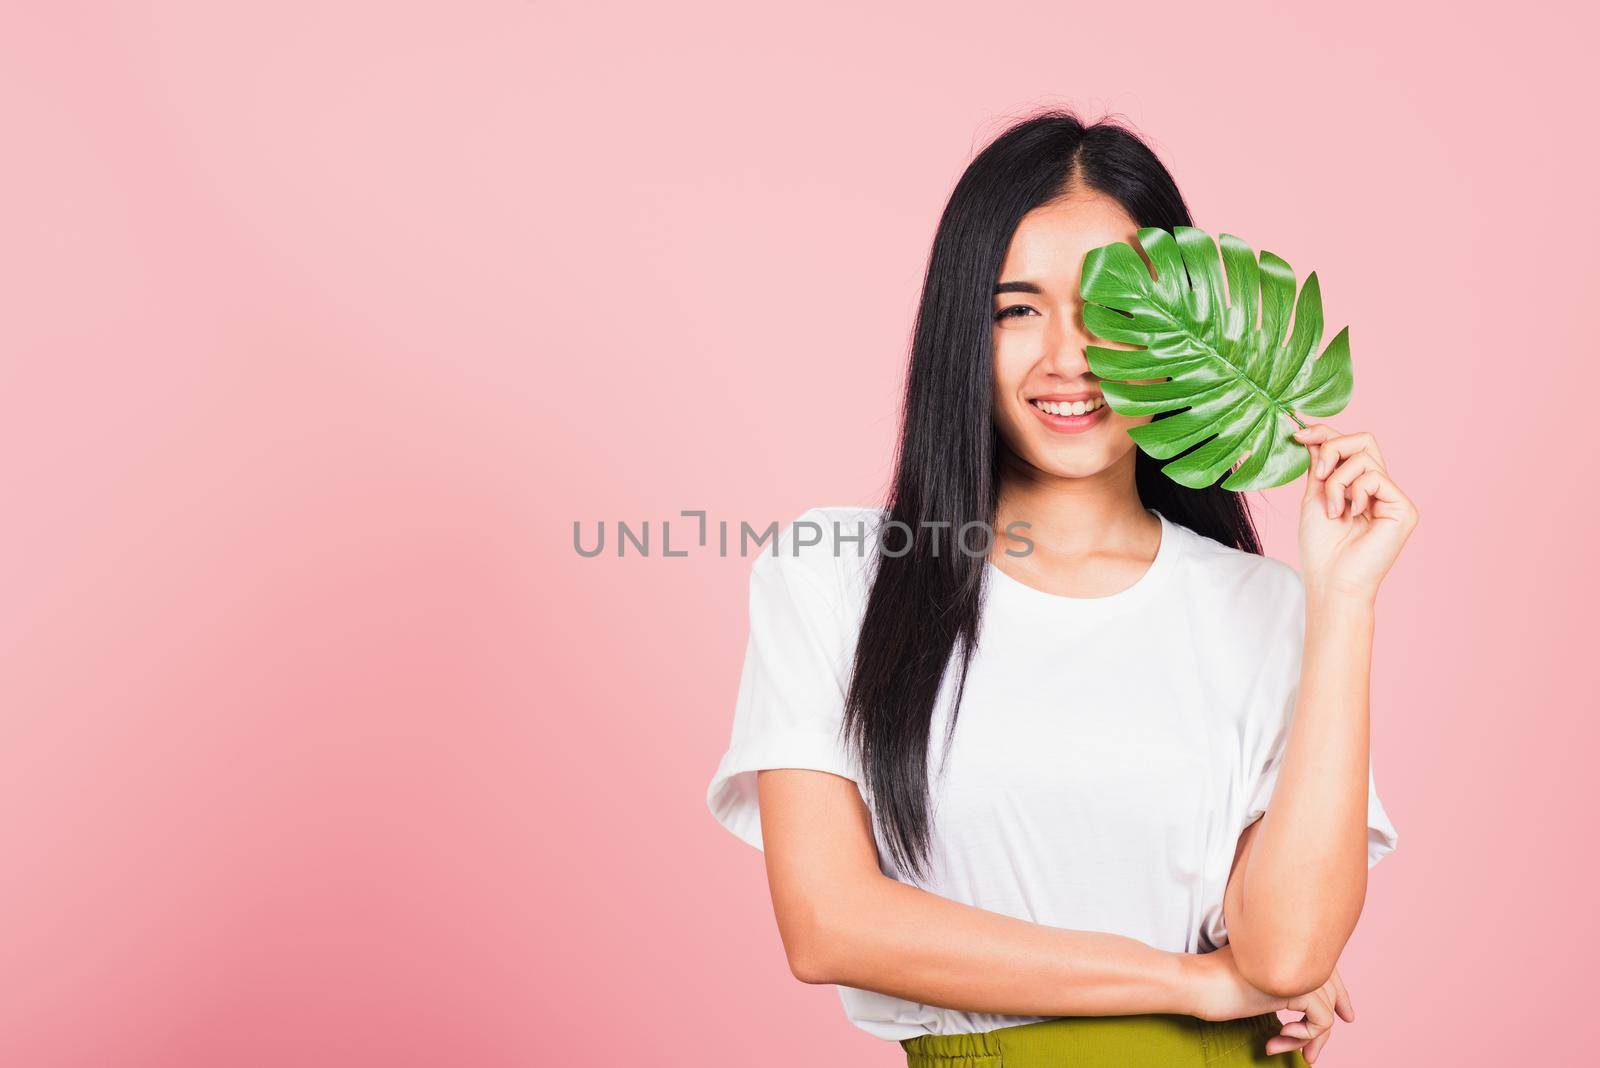 Beauty face. Portrait of Asian beautiful young woman with fresh healthy skin hold green monstera leaf on her face, Tropical Leaves, studio shot isolated on pink background, Skin body care spa concept